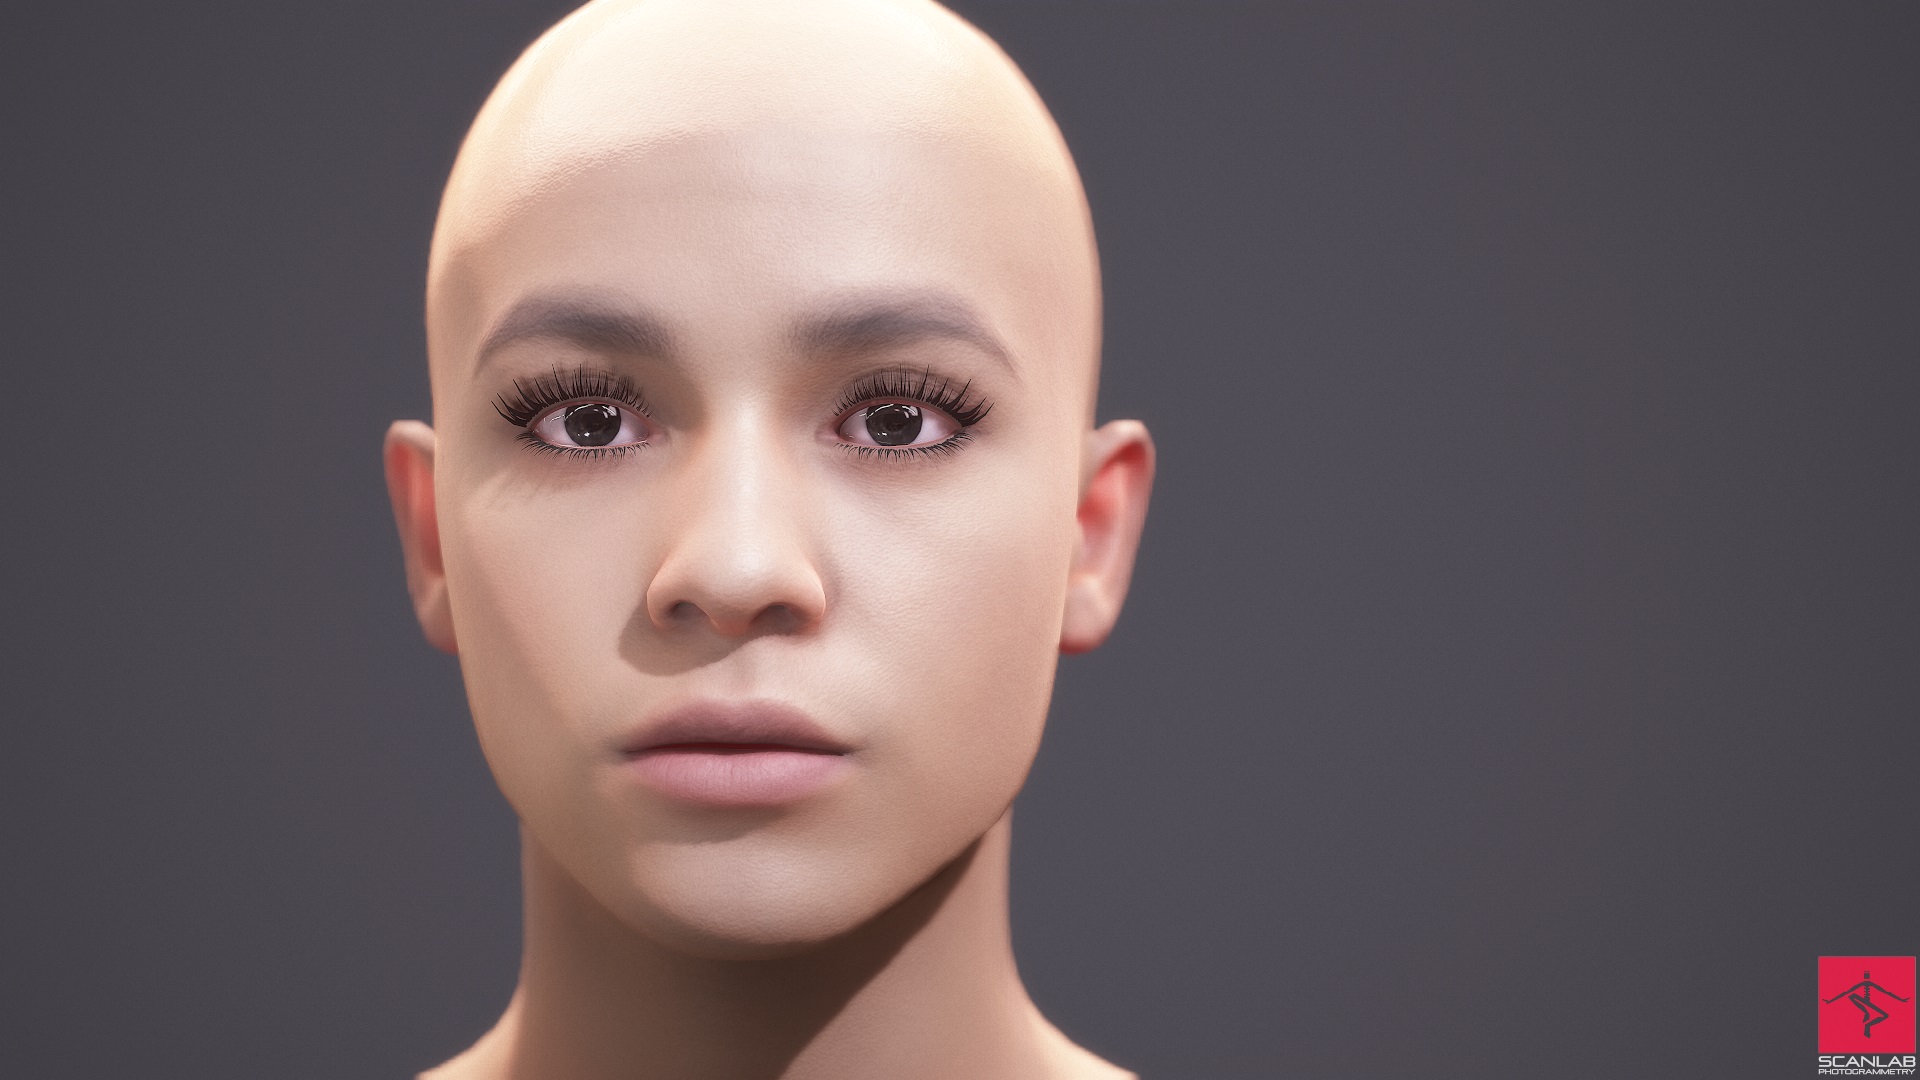 April's 3D Scan for Facial Animation